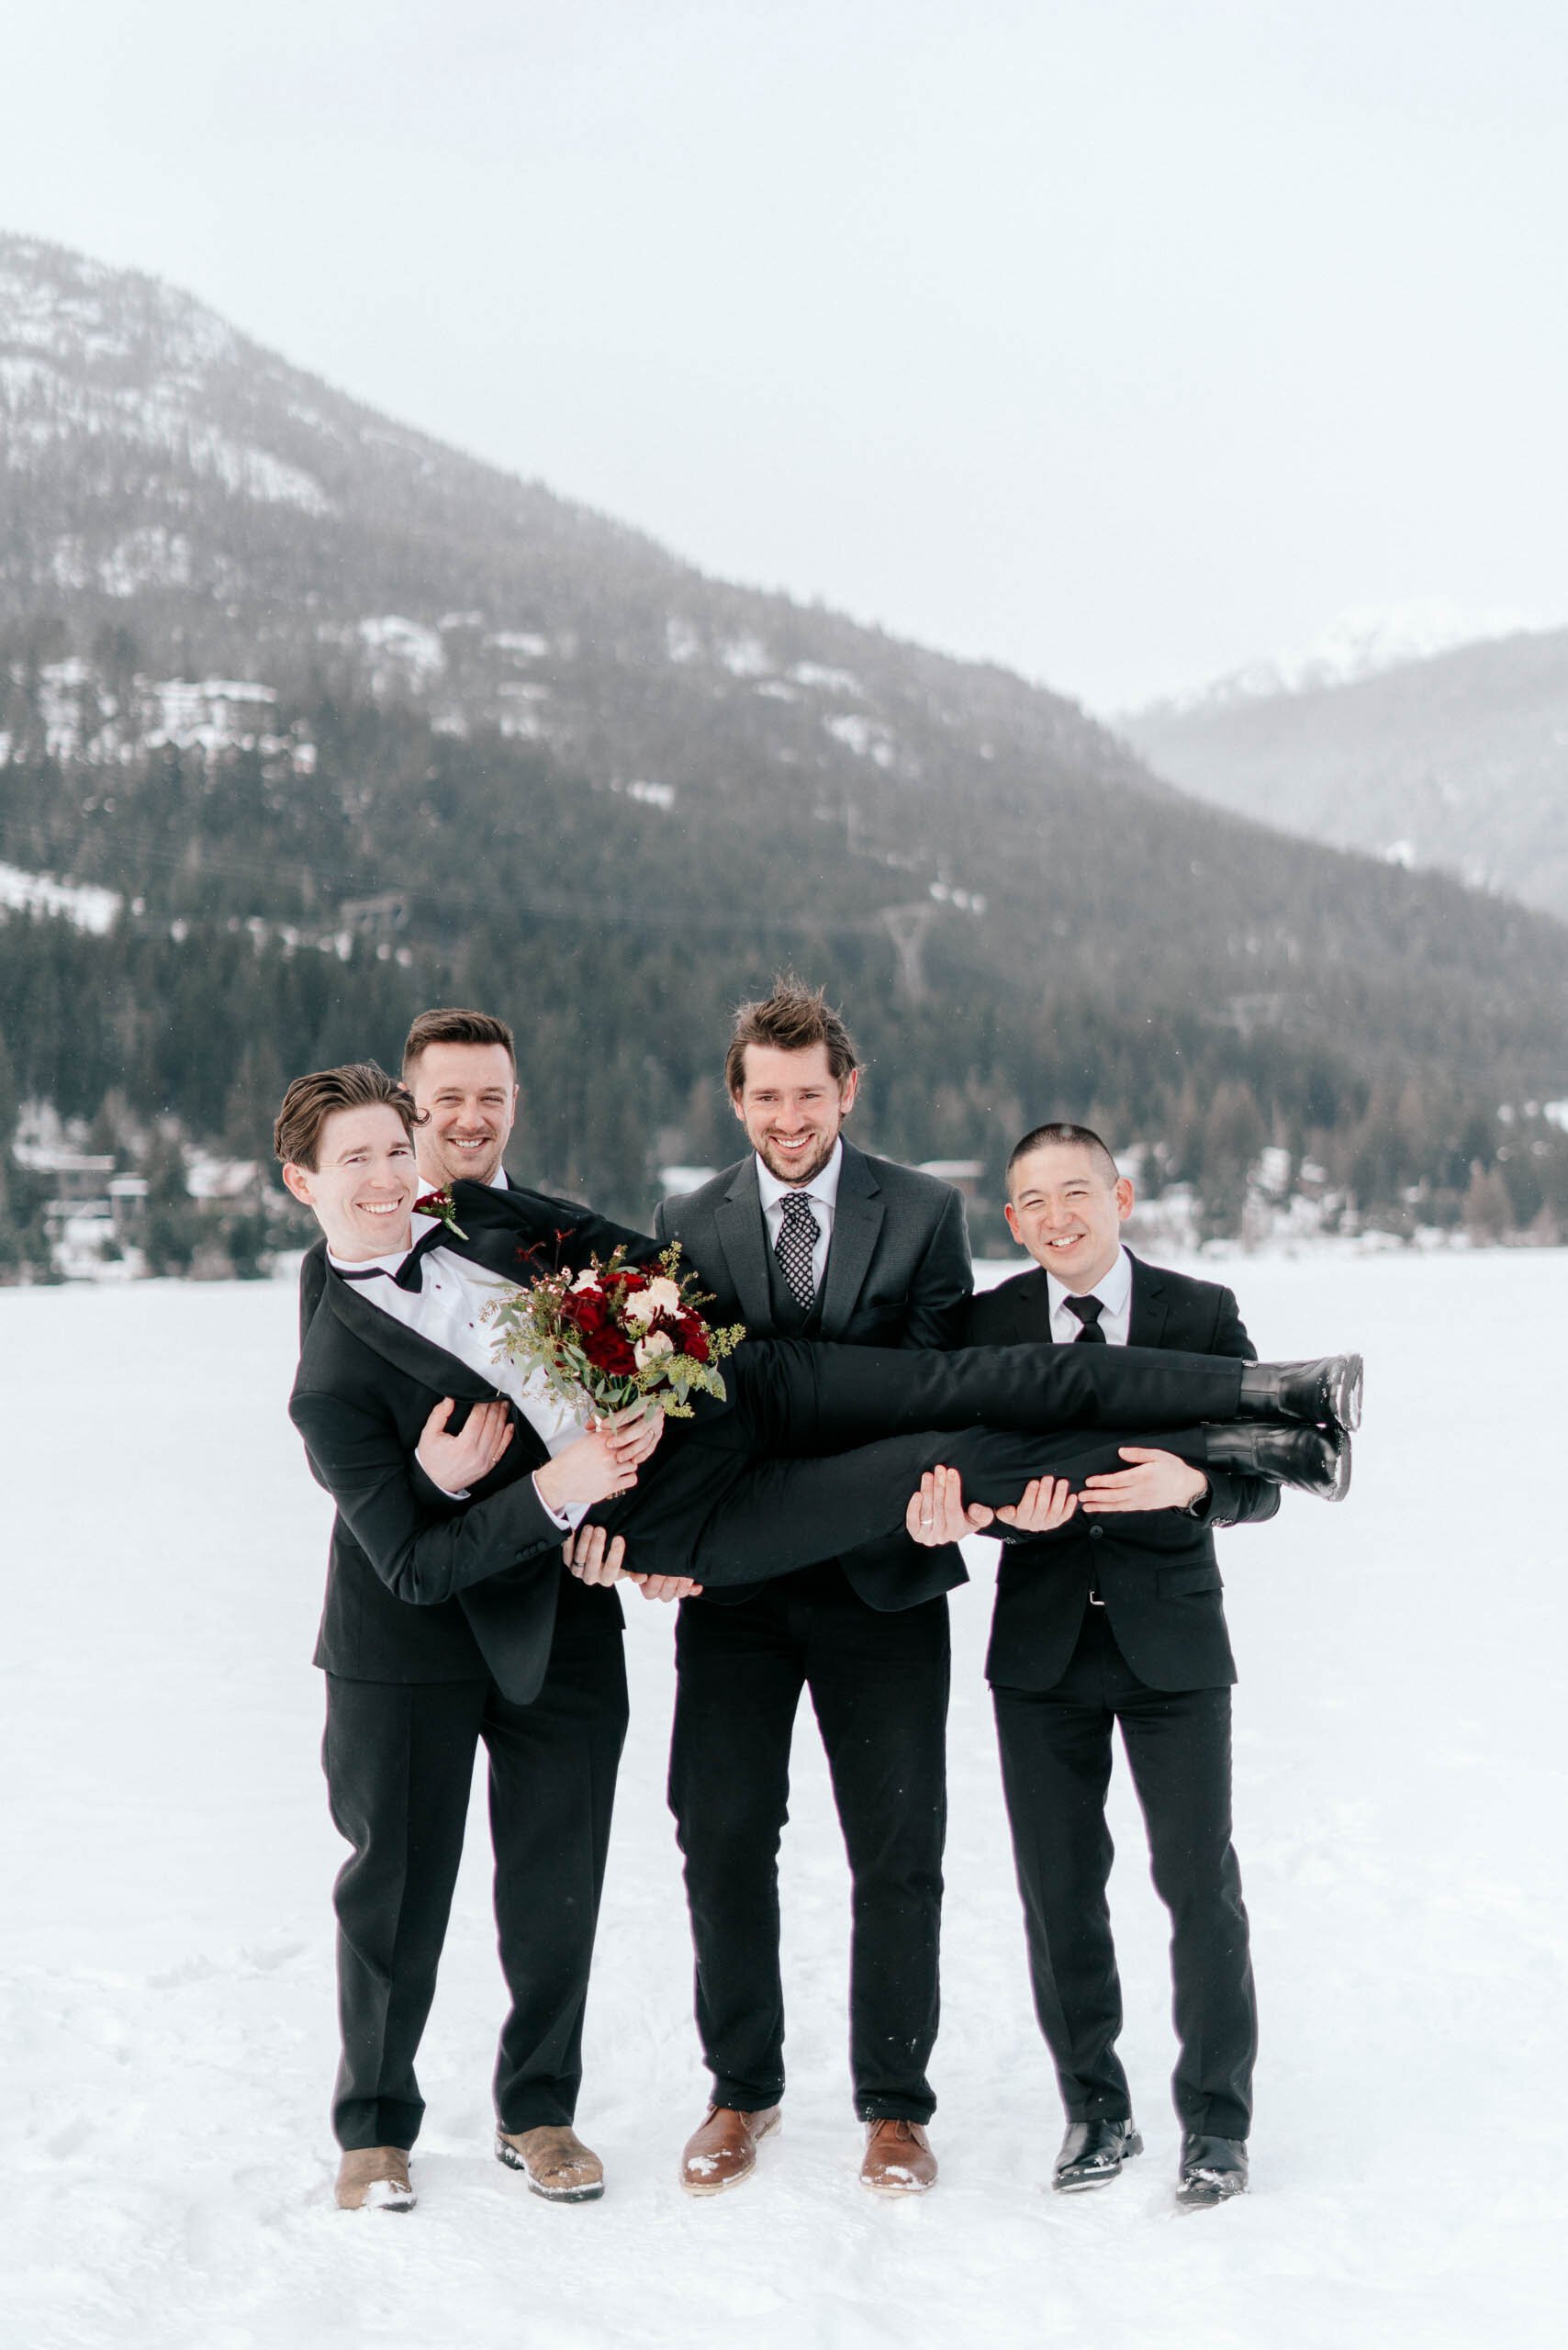 Silly groomens hold the groom up in the air as they pose for the camera in the snowy mountains of Whistler, BC. 